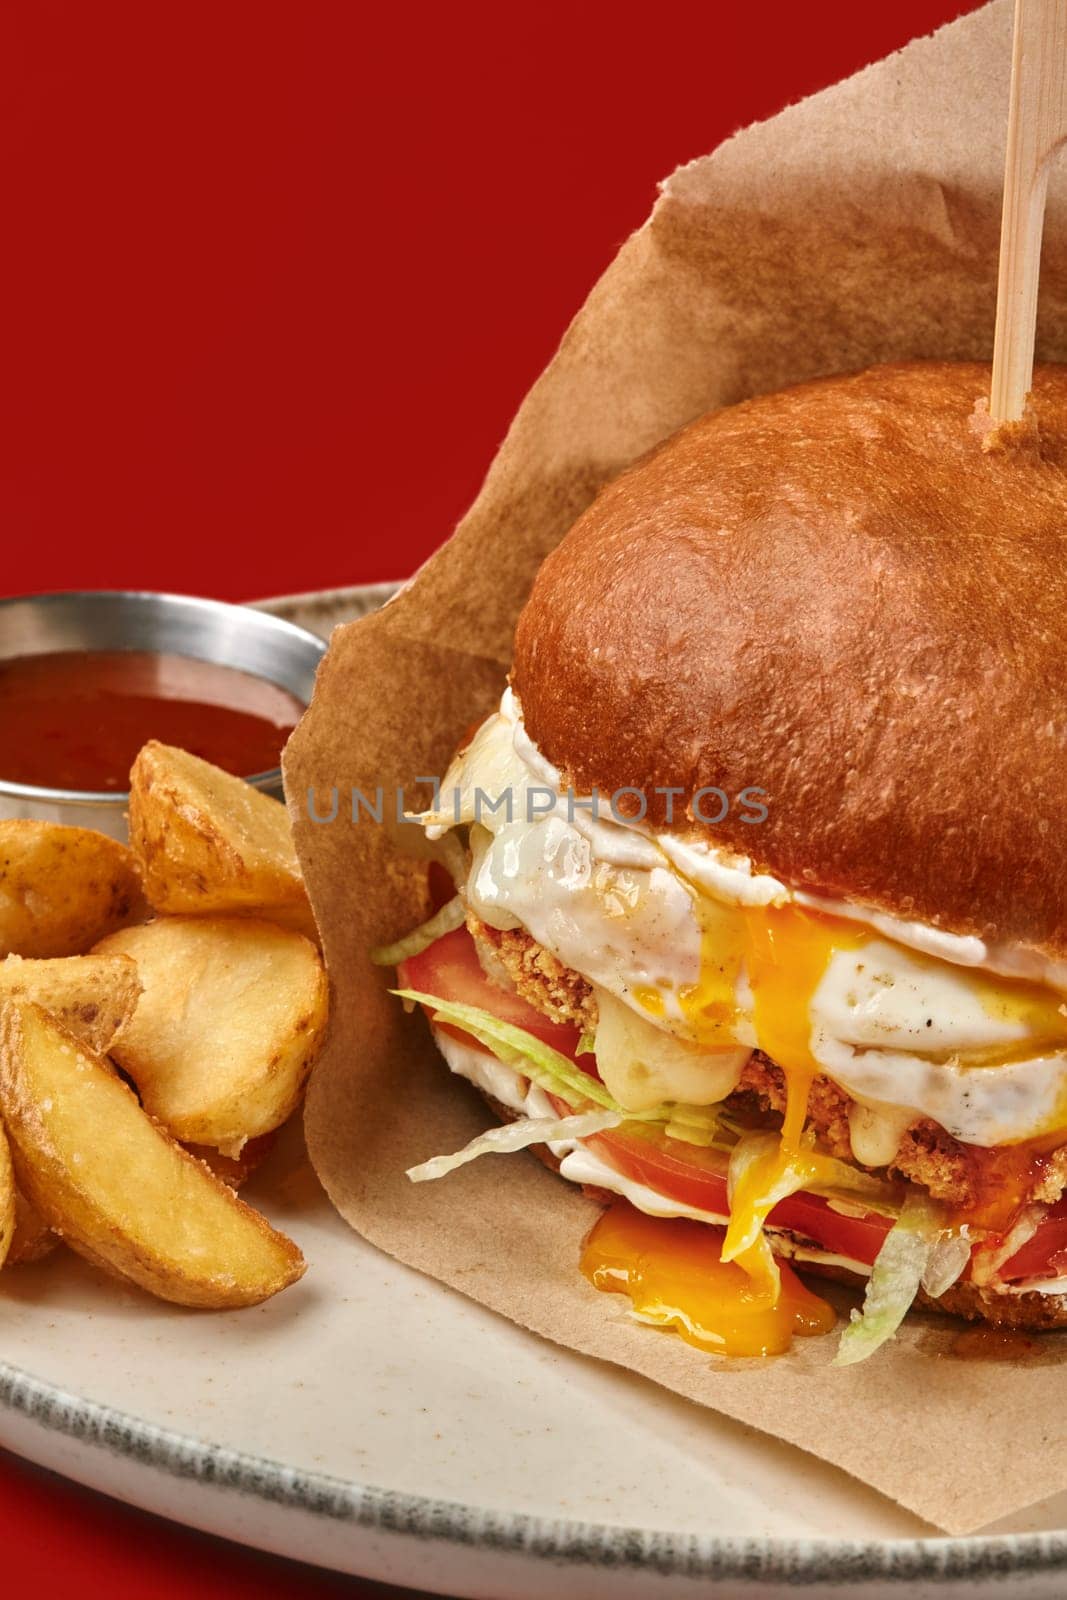 Closeup of juicy beef burger in browned bun with oozing sunny side up egg, tomato slices and lettuce wrapped in craft paper, served with potato wedges and dipping sauce on plate against red backdrop